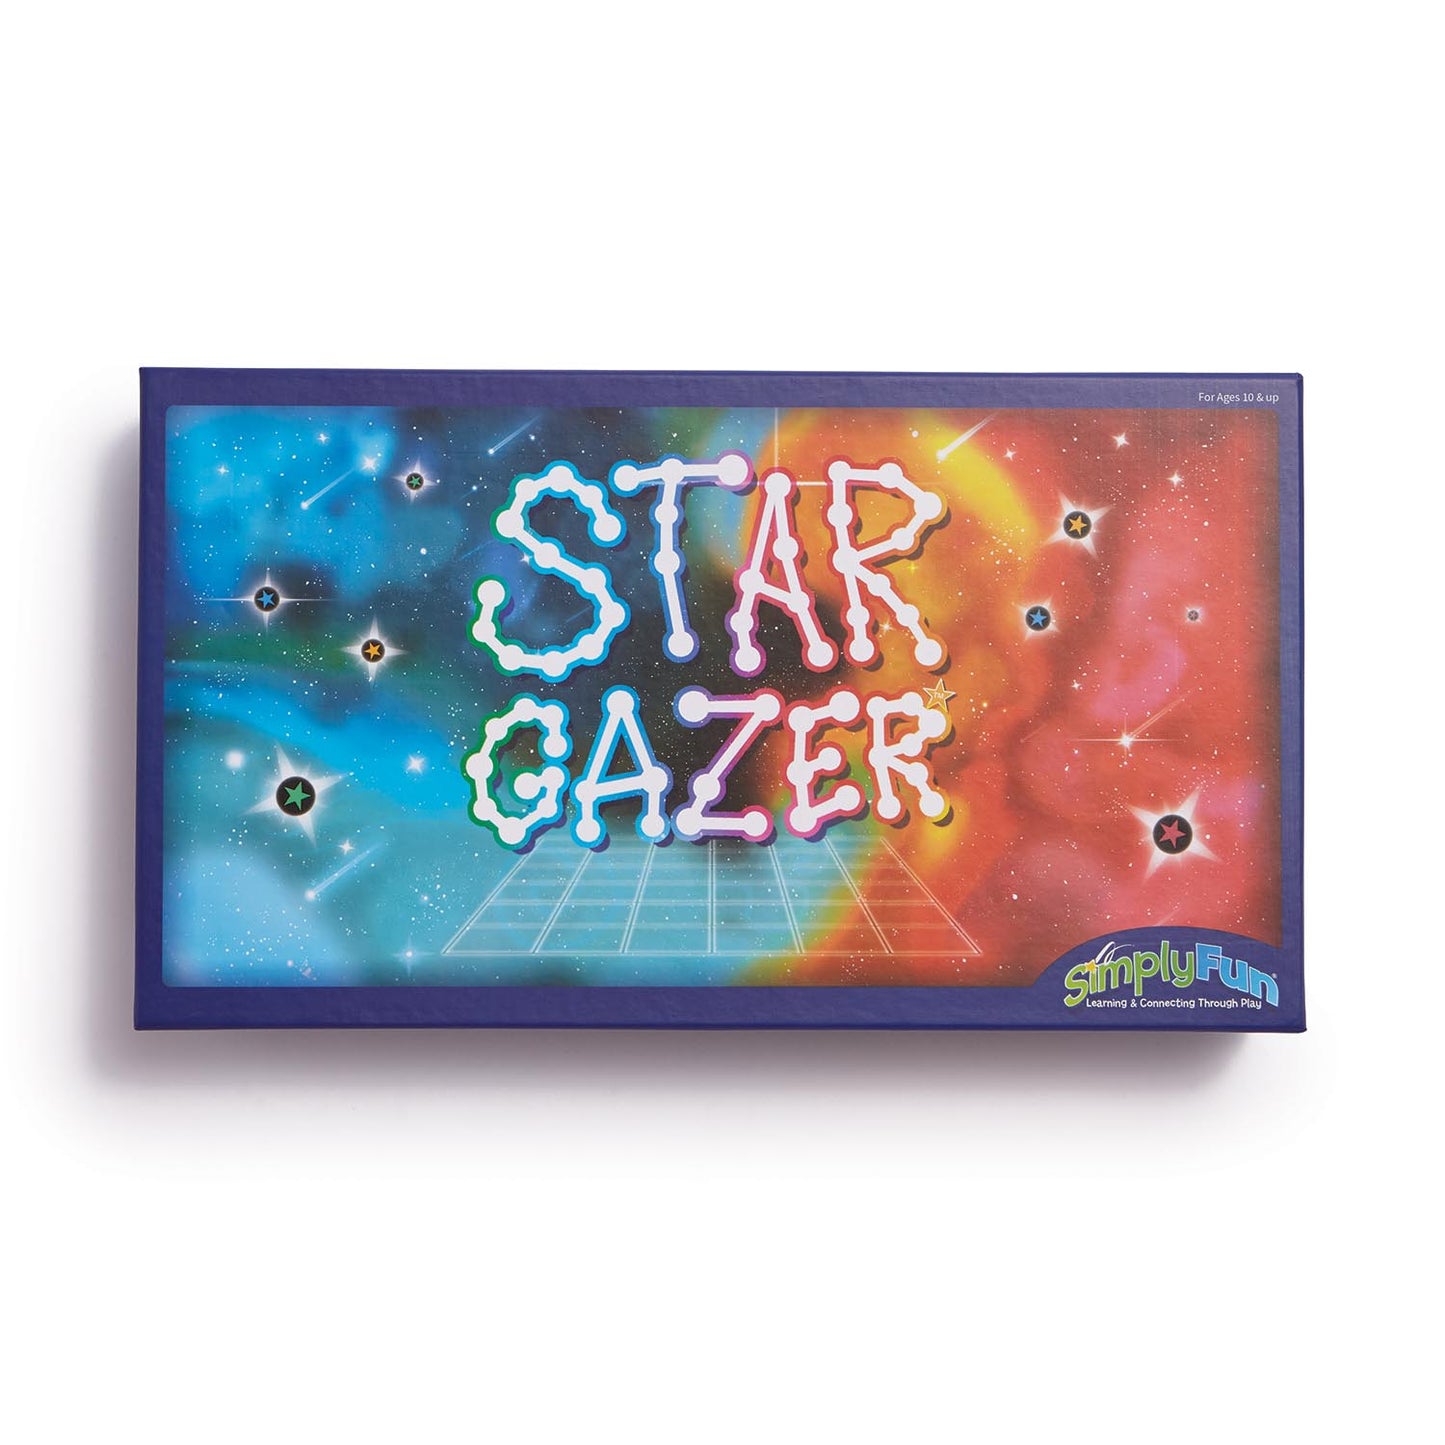 Star Gazer by SimplyFun is a strategy game focusing on spatial reasoning and patterning for ages 10 and up.